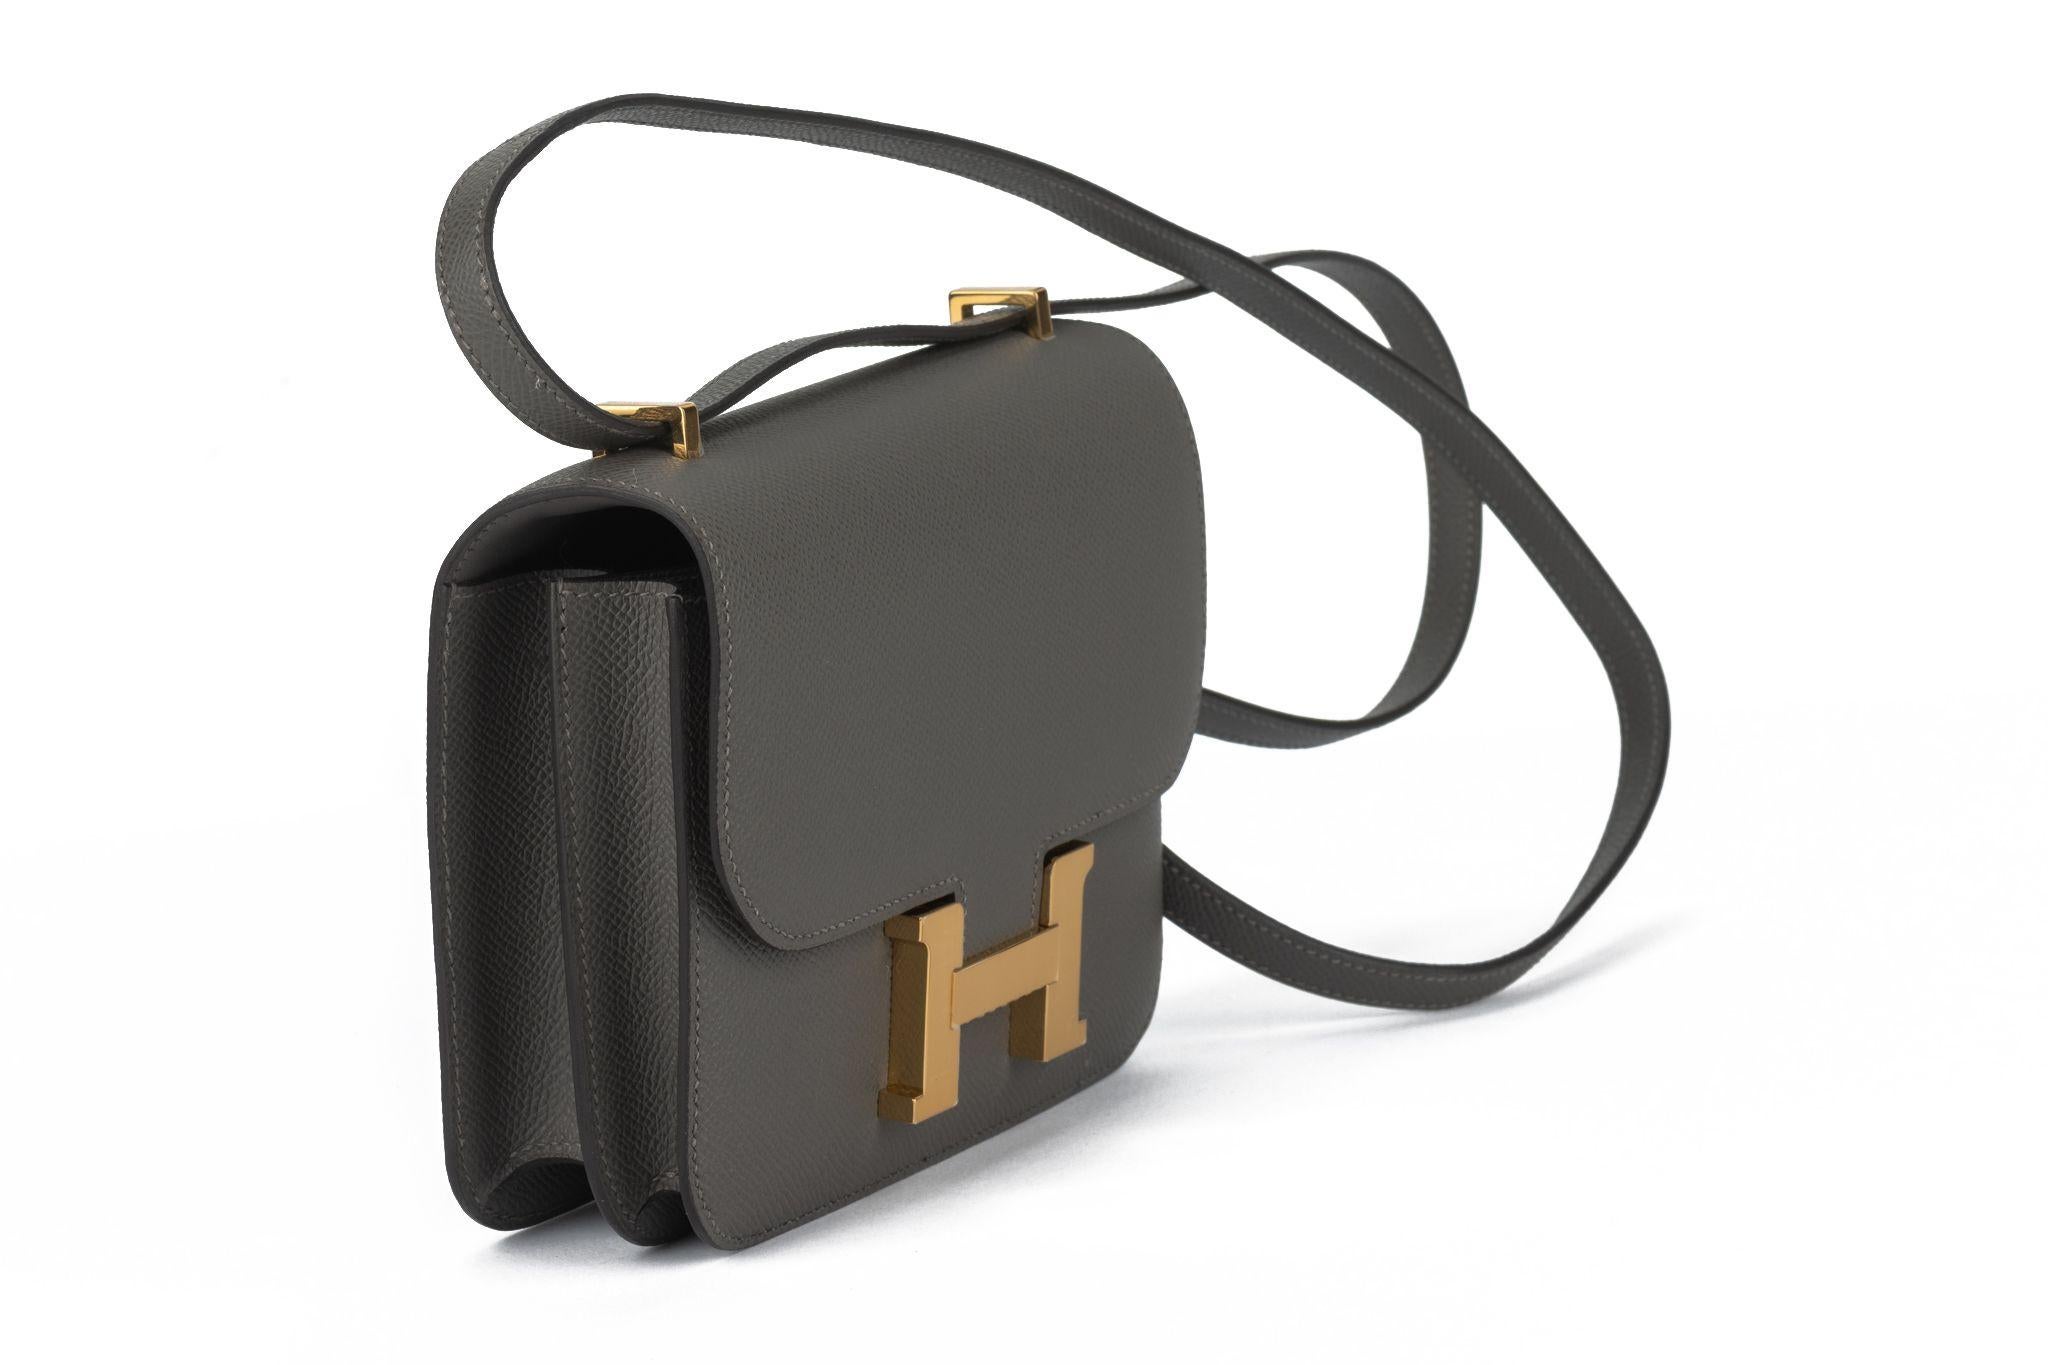 Hermes mini constance cross body 18cm in gris meyer epsom leather and gold tone hardware. Date stamp B for 2023. Shoulder strap drop 20